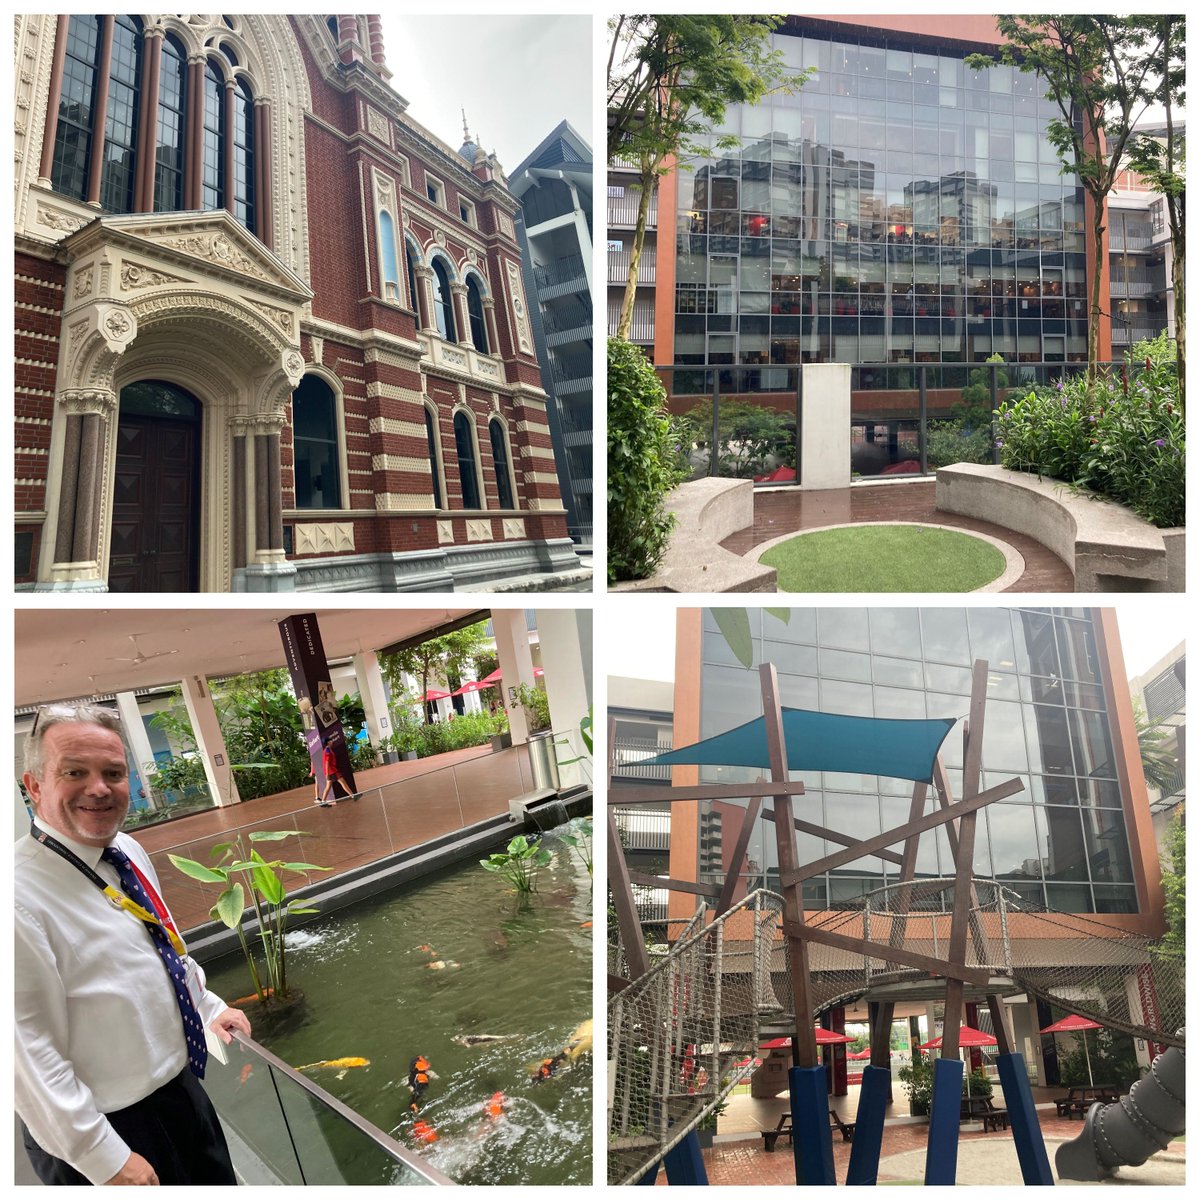 Dulwich College Singapore @DCSG_Dulwich pays an homage to DC London @DulwichCollege whilst striking out with a bold new vision, including the country’s first carbon neutral school building. This is school architecture at its very best.